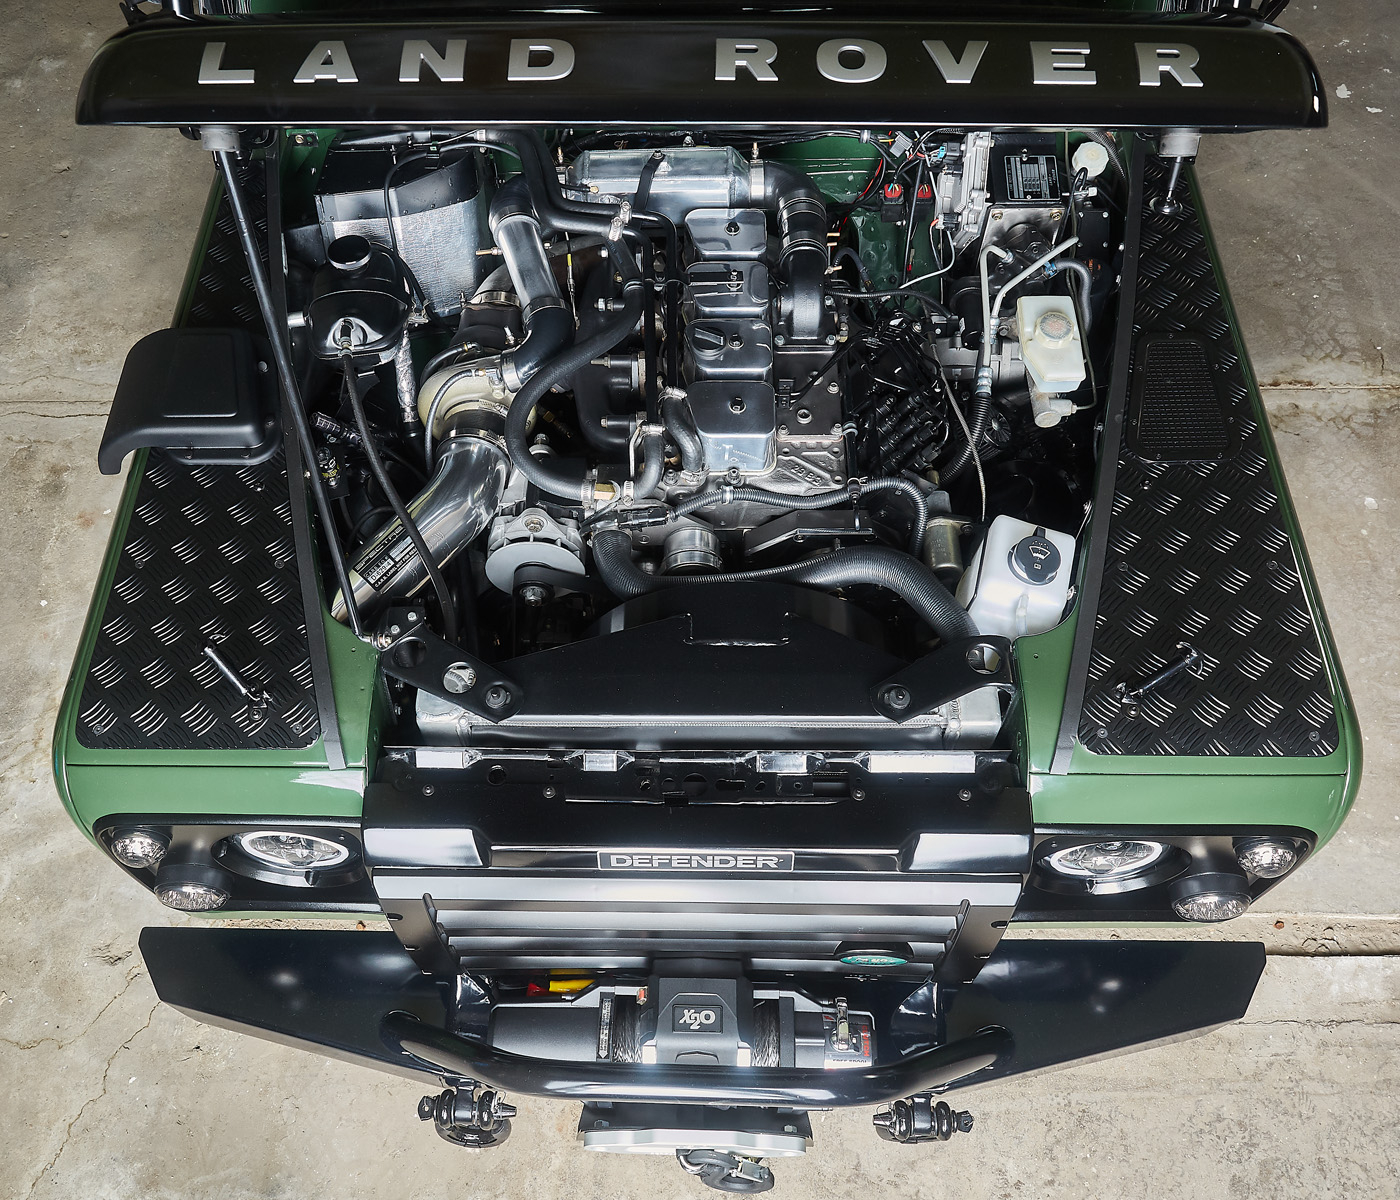 Engine Bay of Classic Landrover Defender 4x4